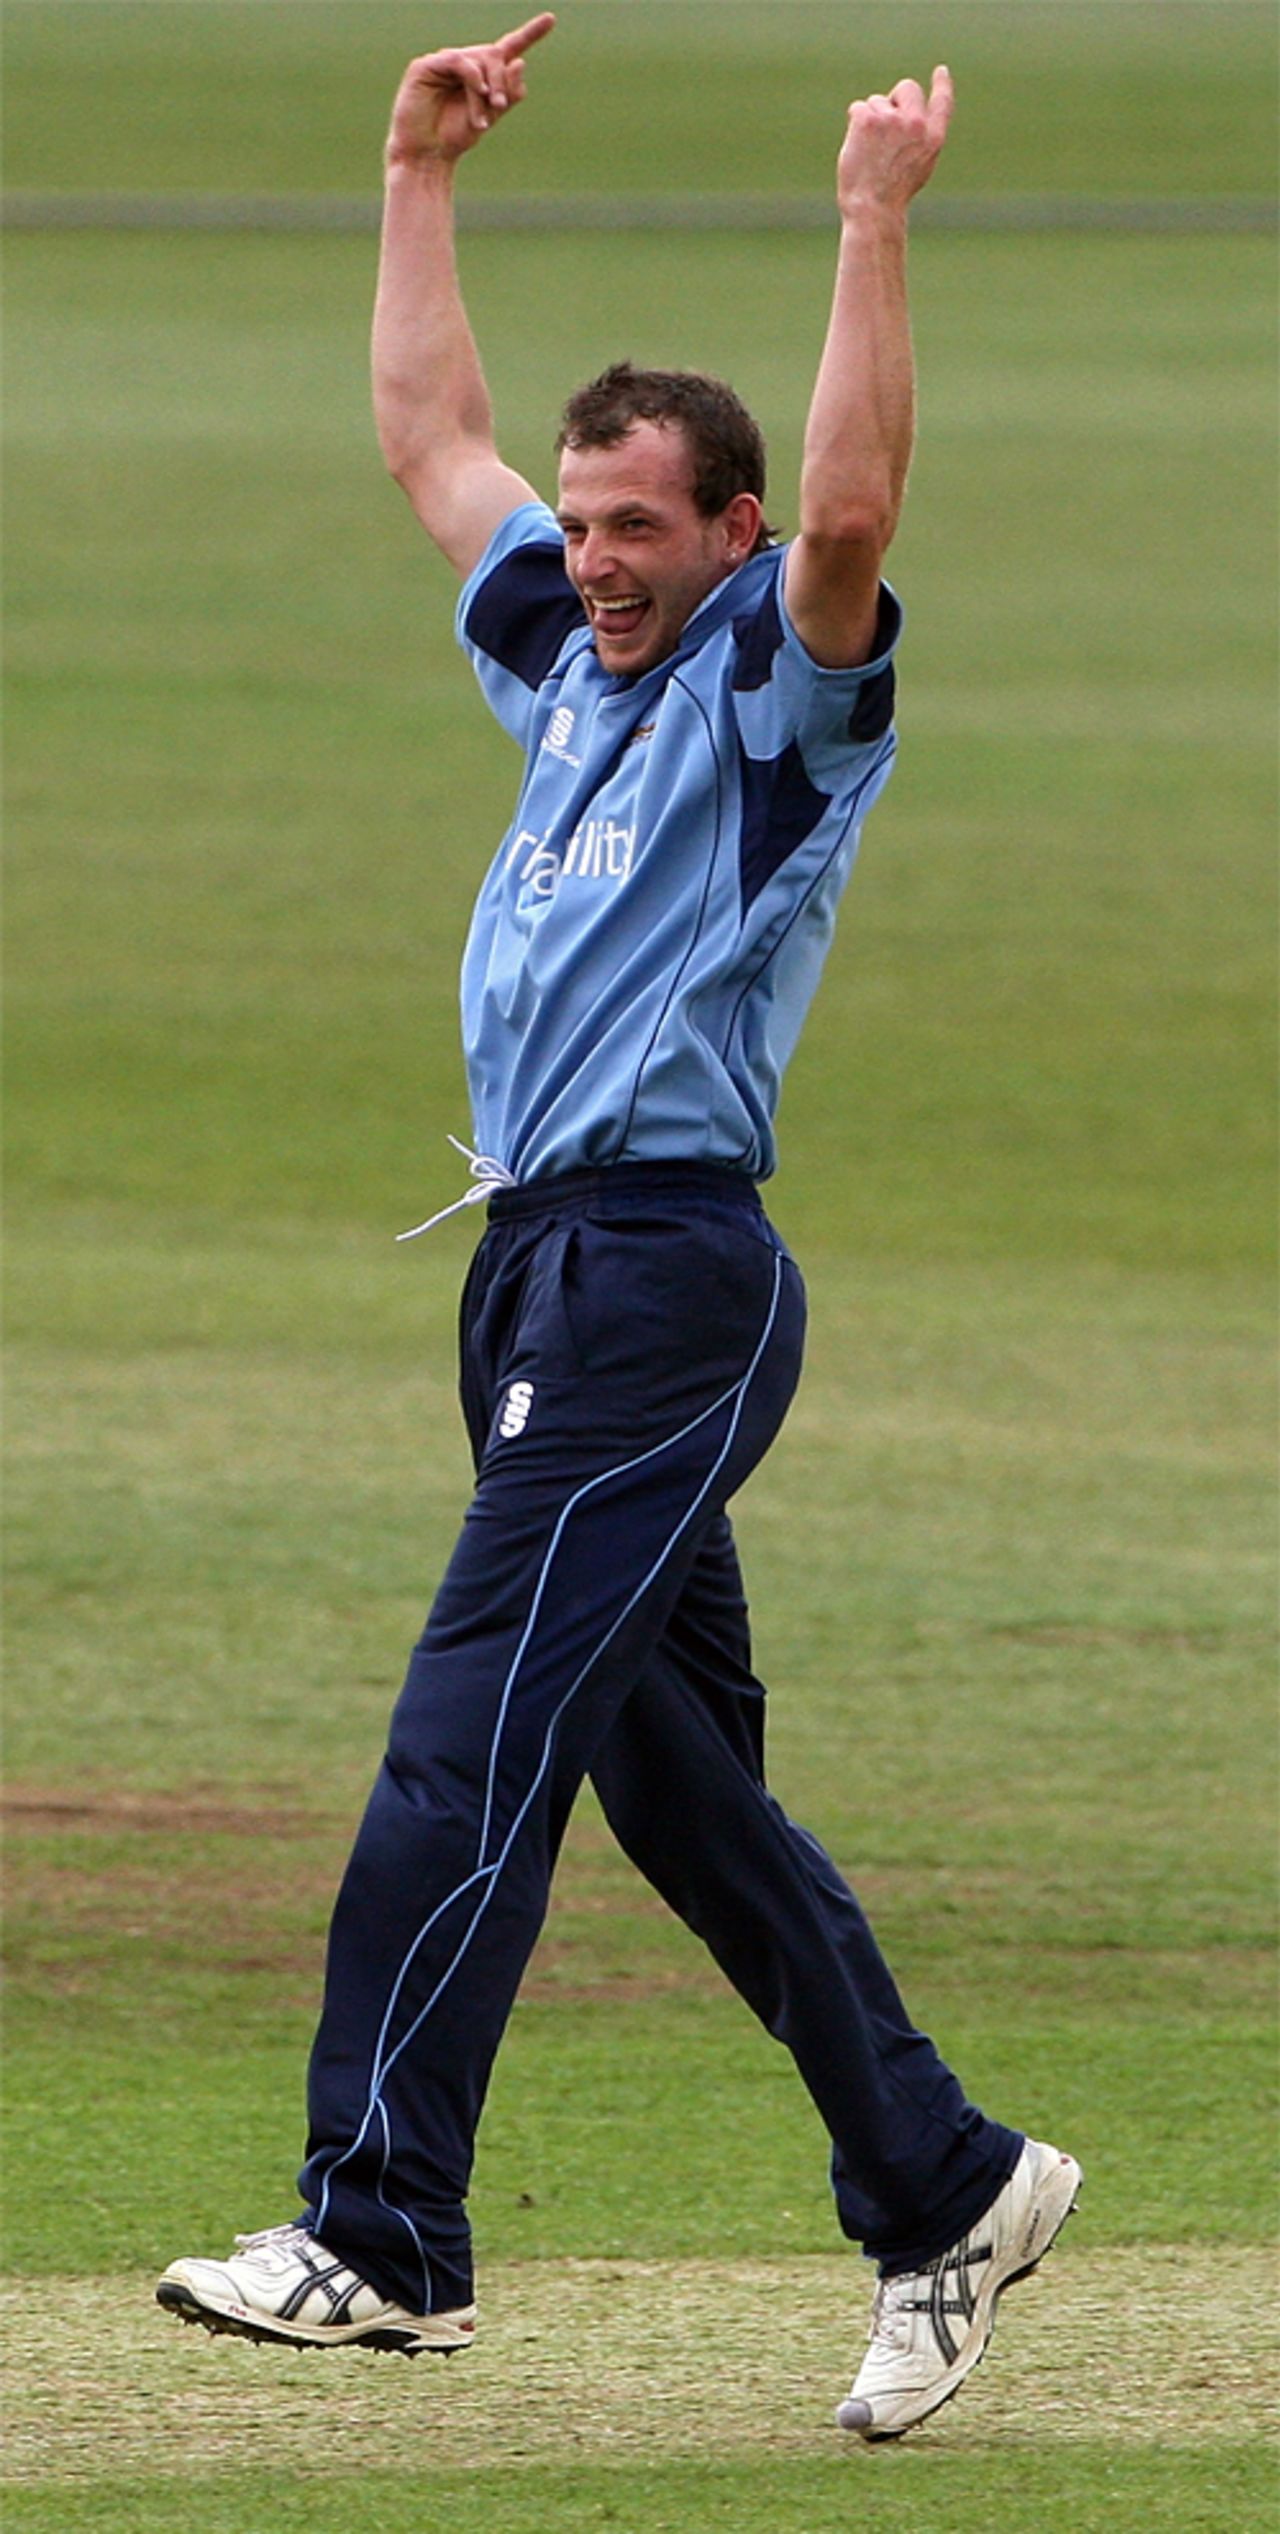 Graham Wagg celebrates, as did the rest of his team on beating Lancashire, Derbyshire v Lancashire, Friends Provident Trophy, Derby, May 22, 2008